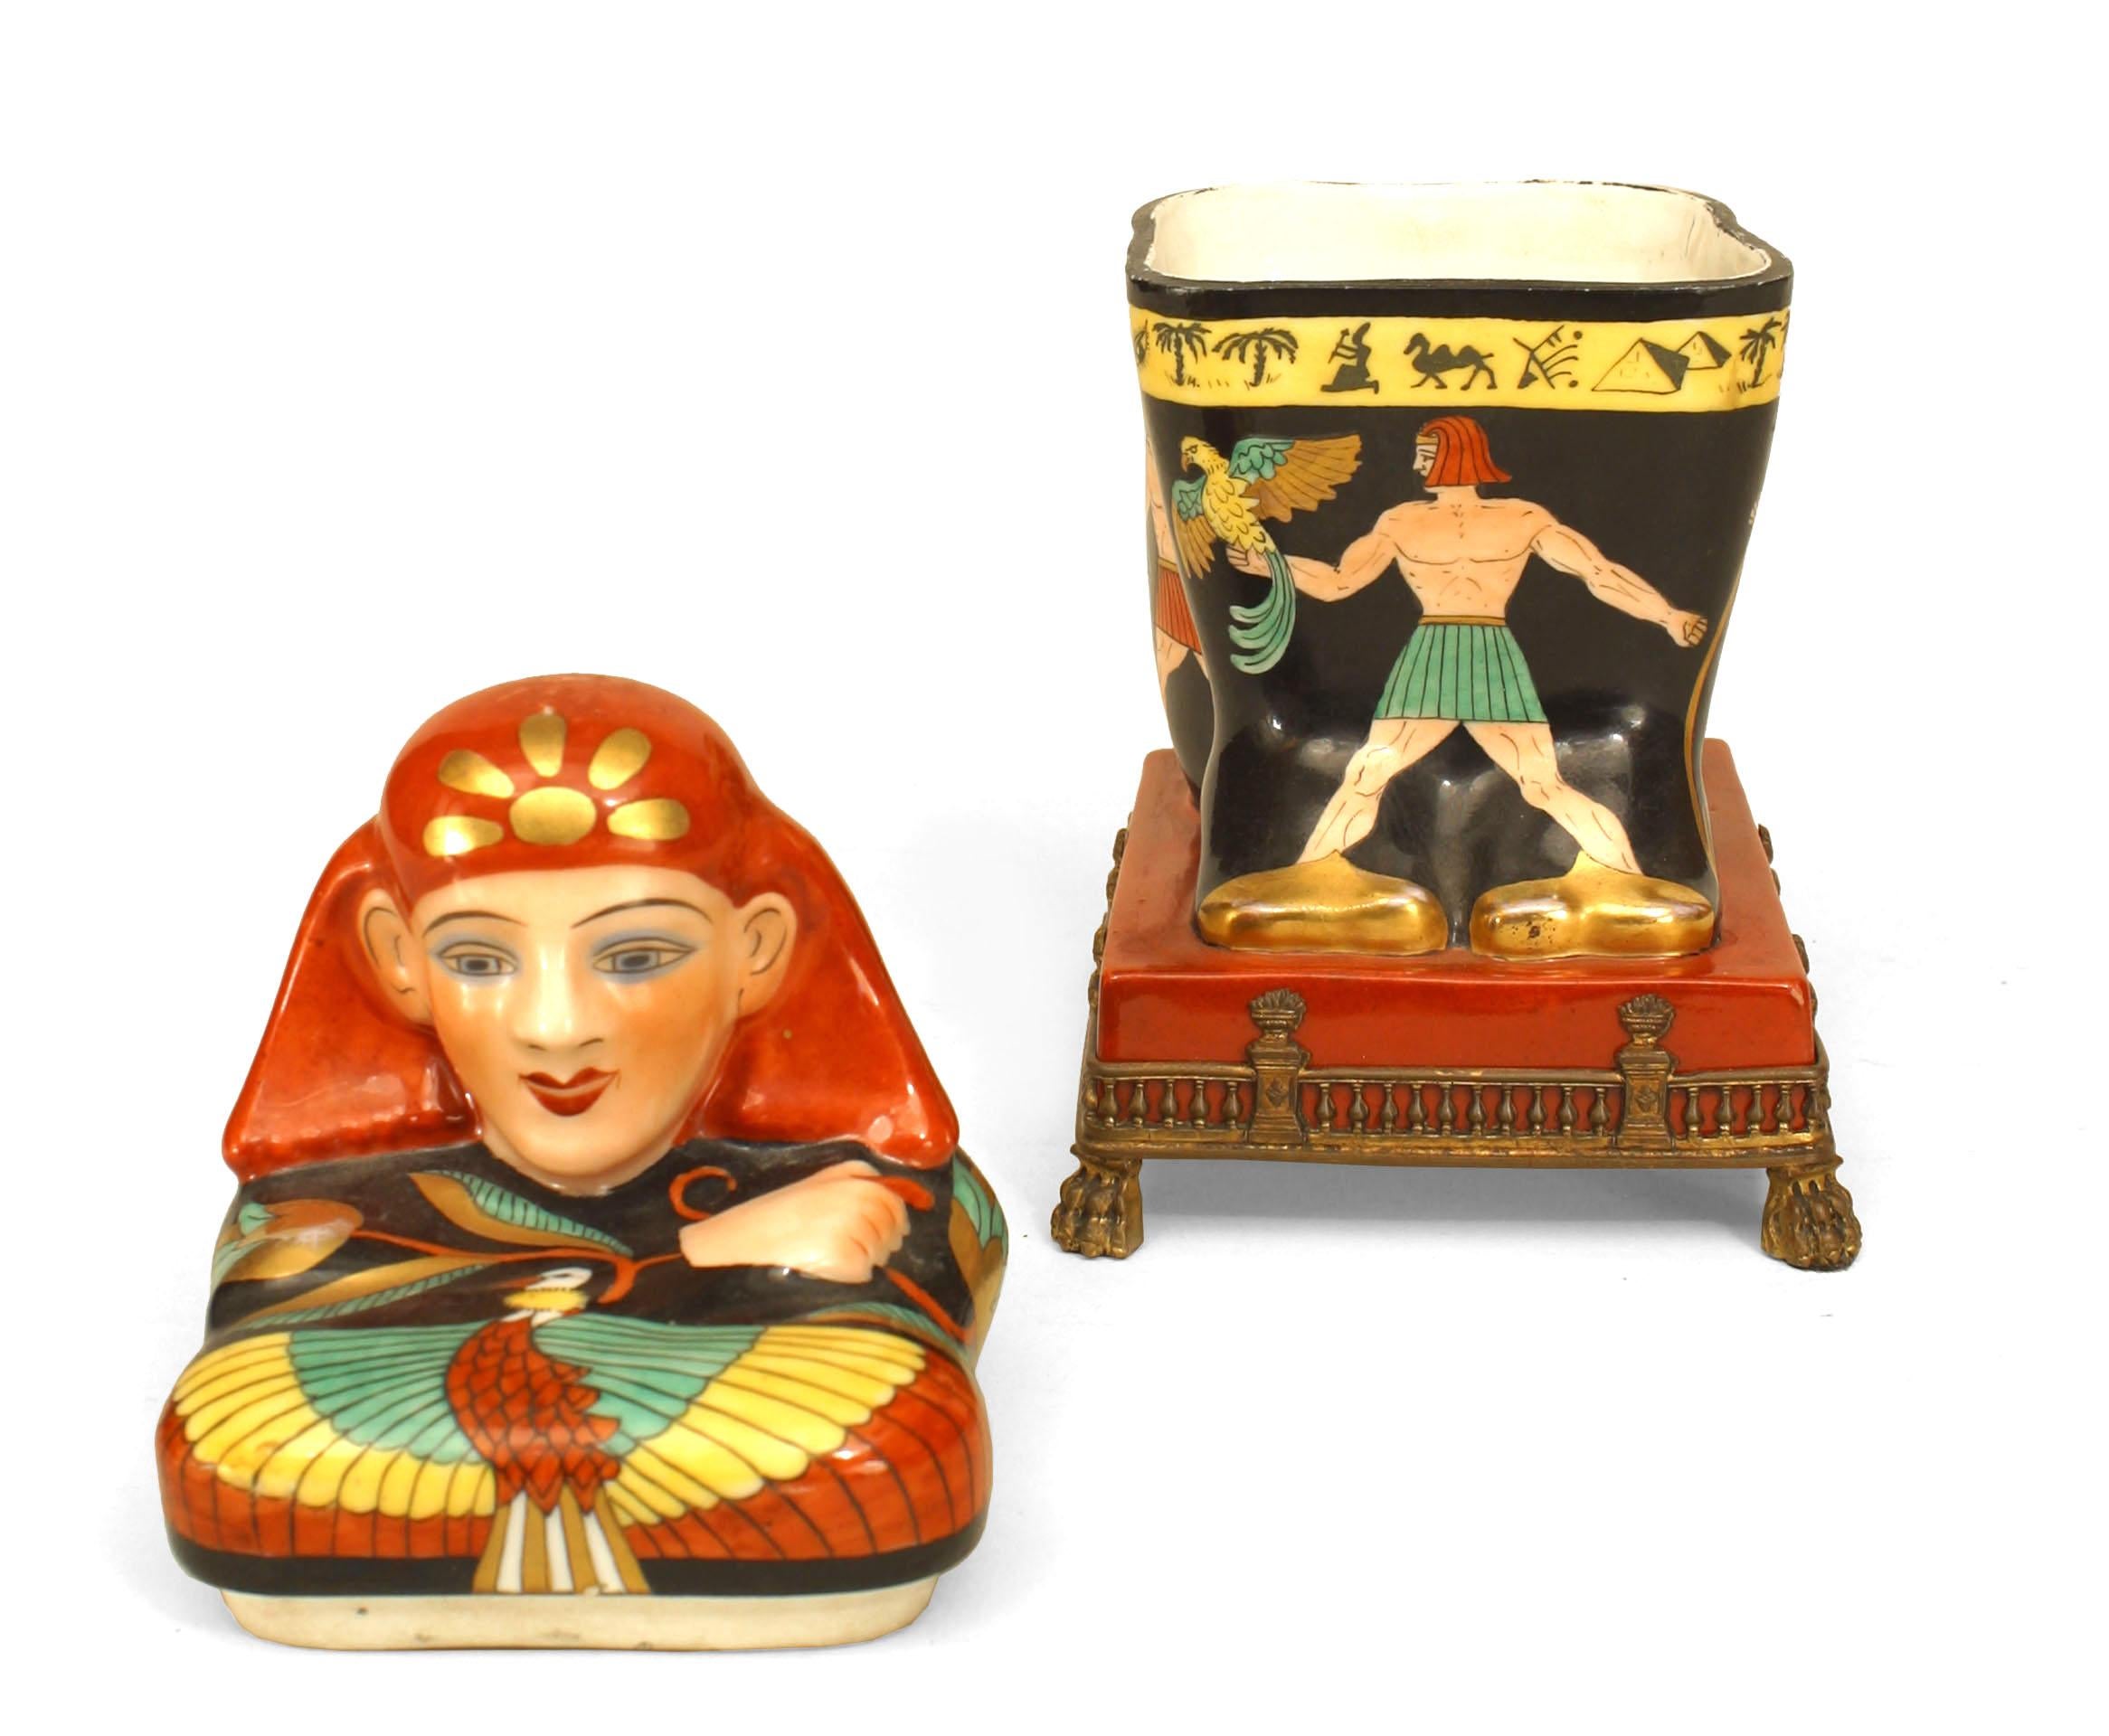 19th Century French Porcelain Sarcophagus-Shaped Box